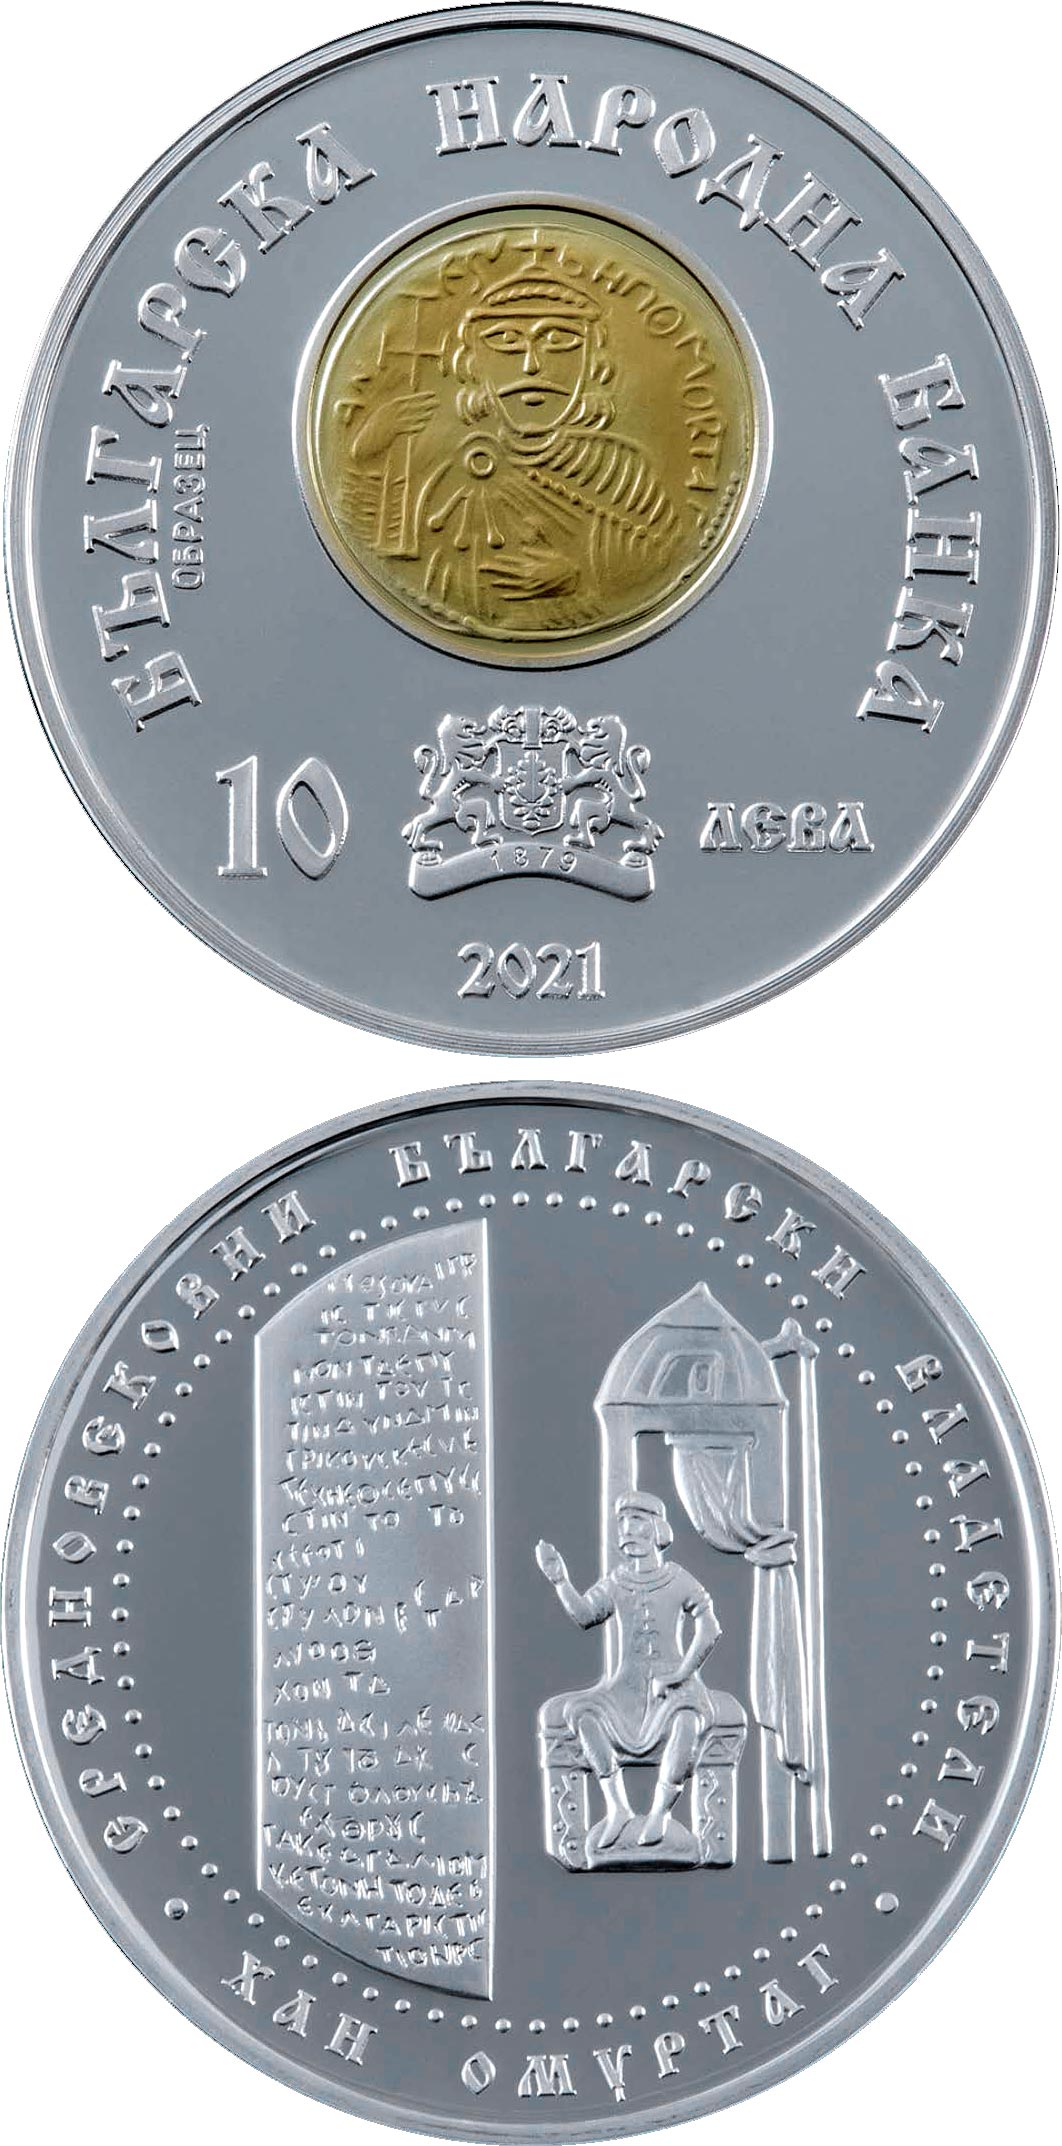 Image of 10 lev  coin - Khan Omurtag | Bulgaria 2021.  The Bimetal: gold, silver coin is of Proof quality.